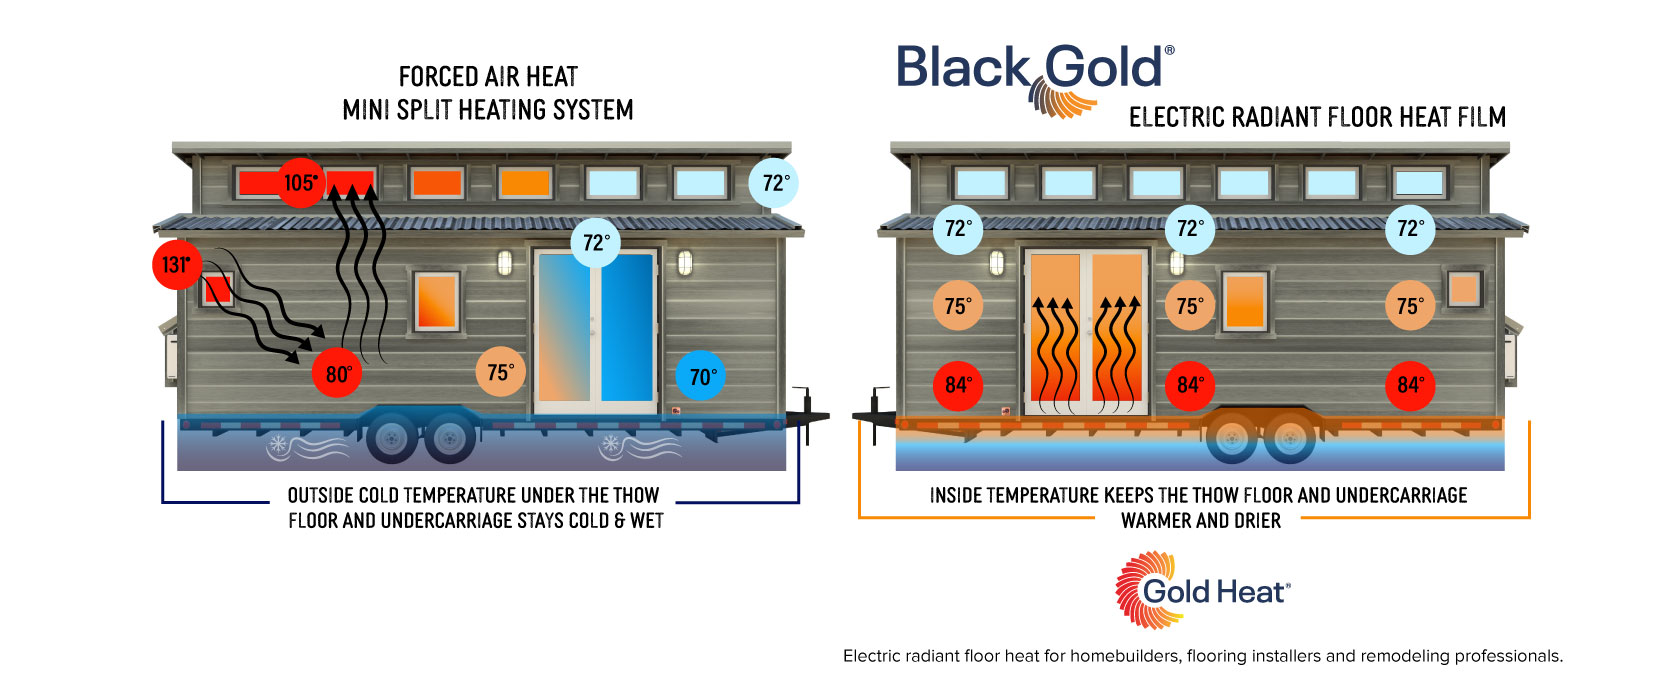 THOW-forced-air-vs-radiant-floor-heat-by-black-gold